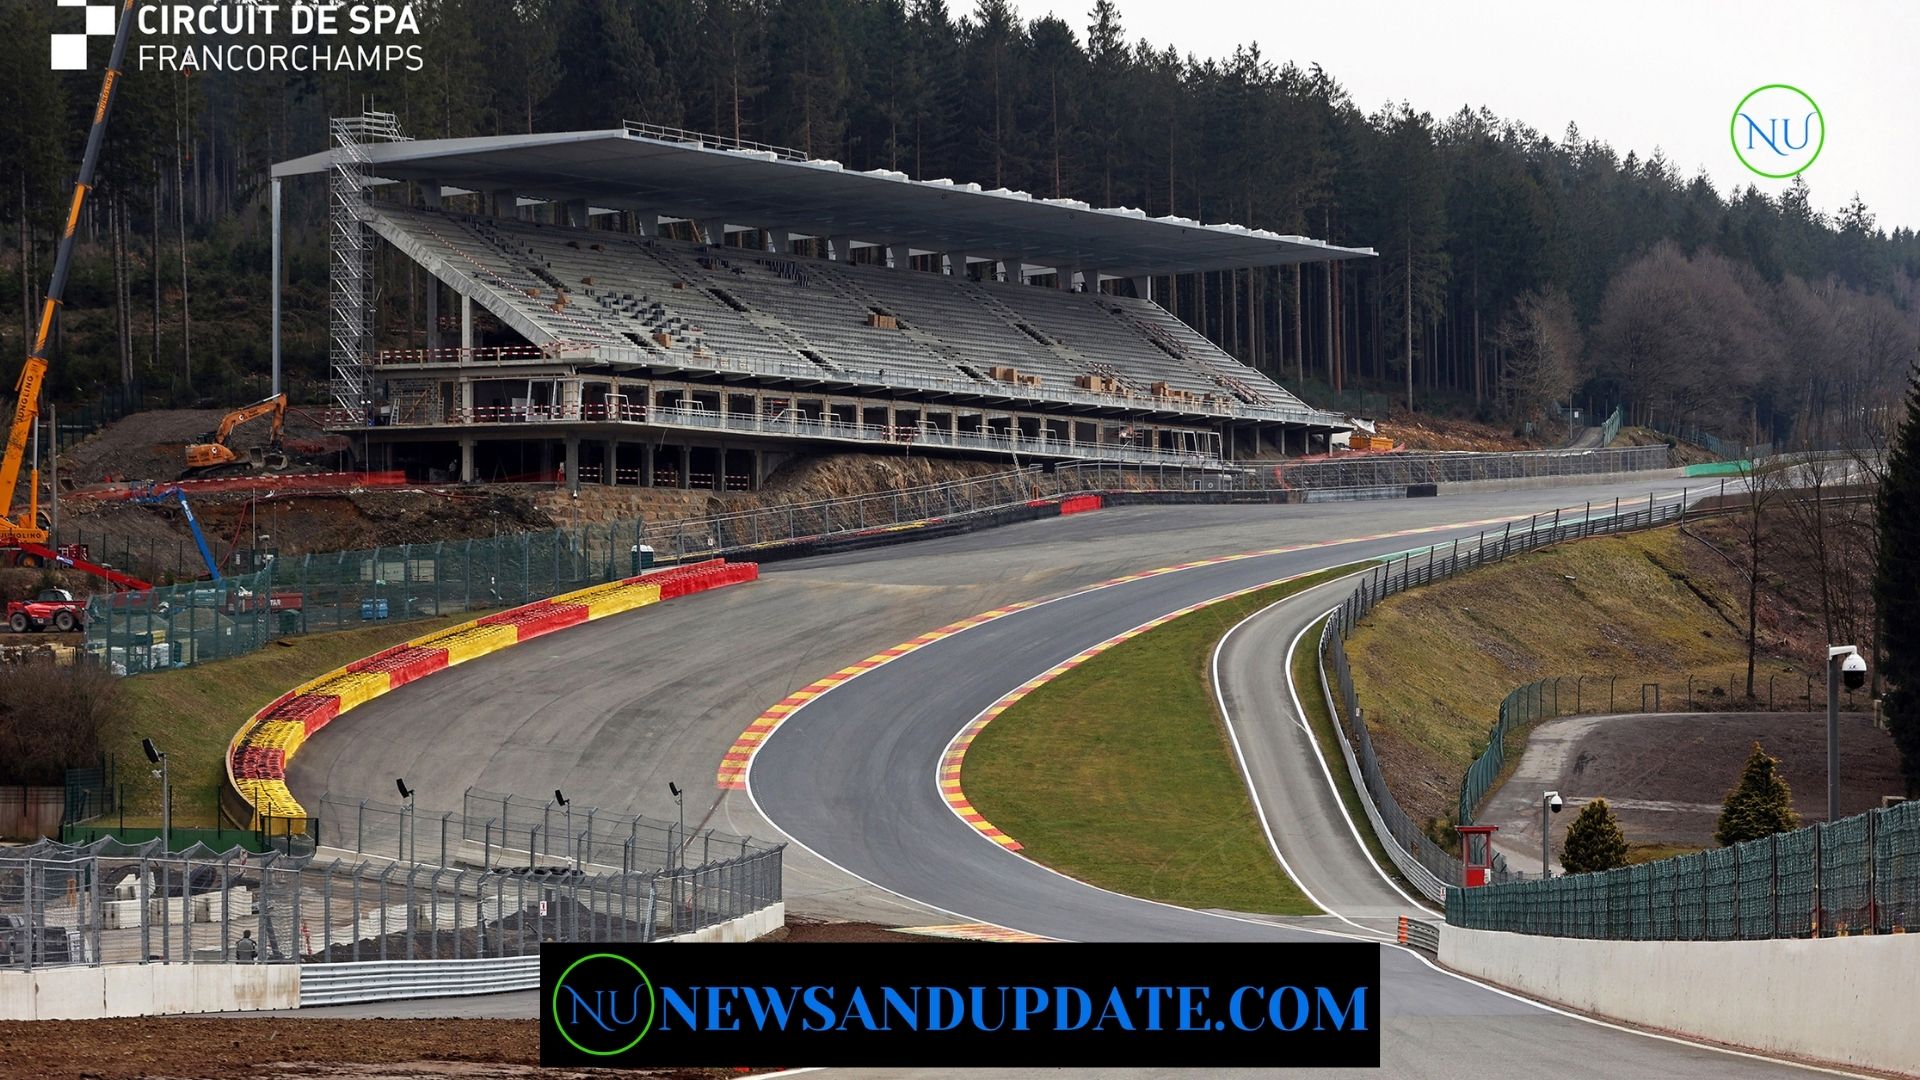 Belgian GP: Spa is willing to make changes in order to stay on the F1 calendar